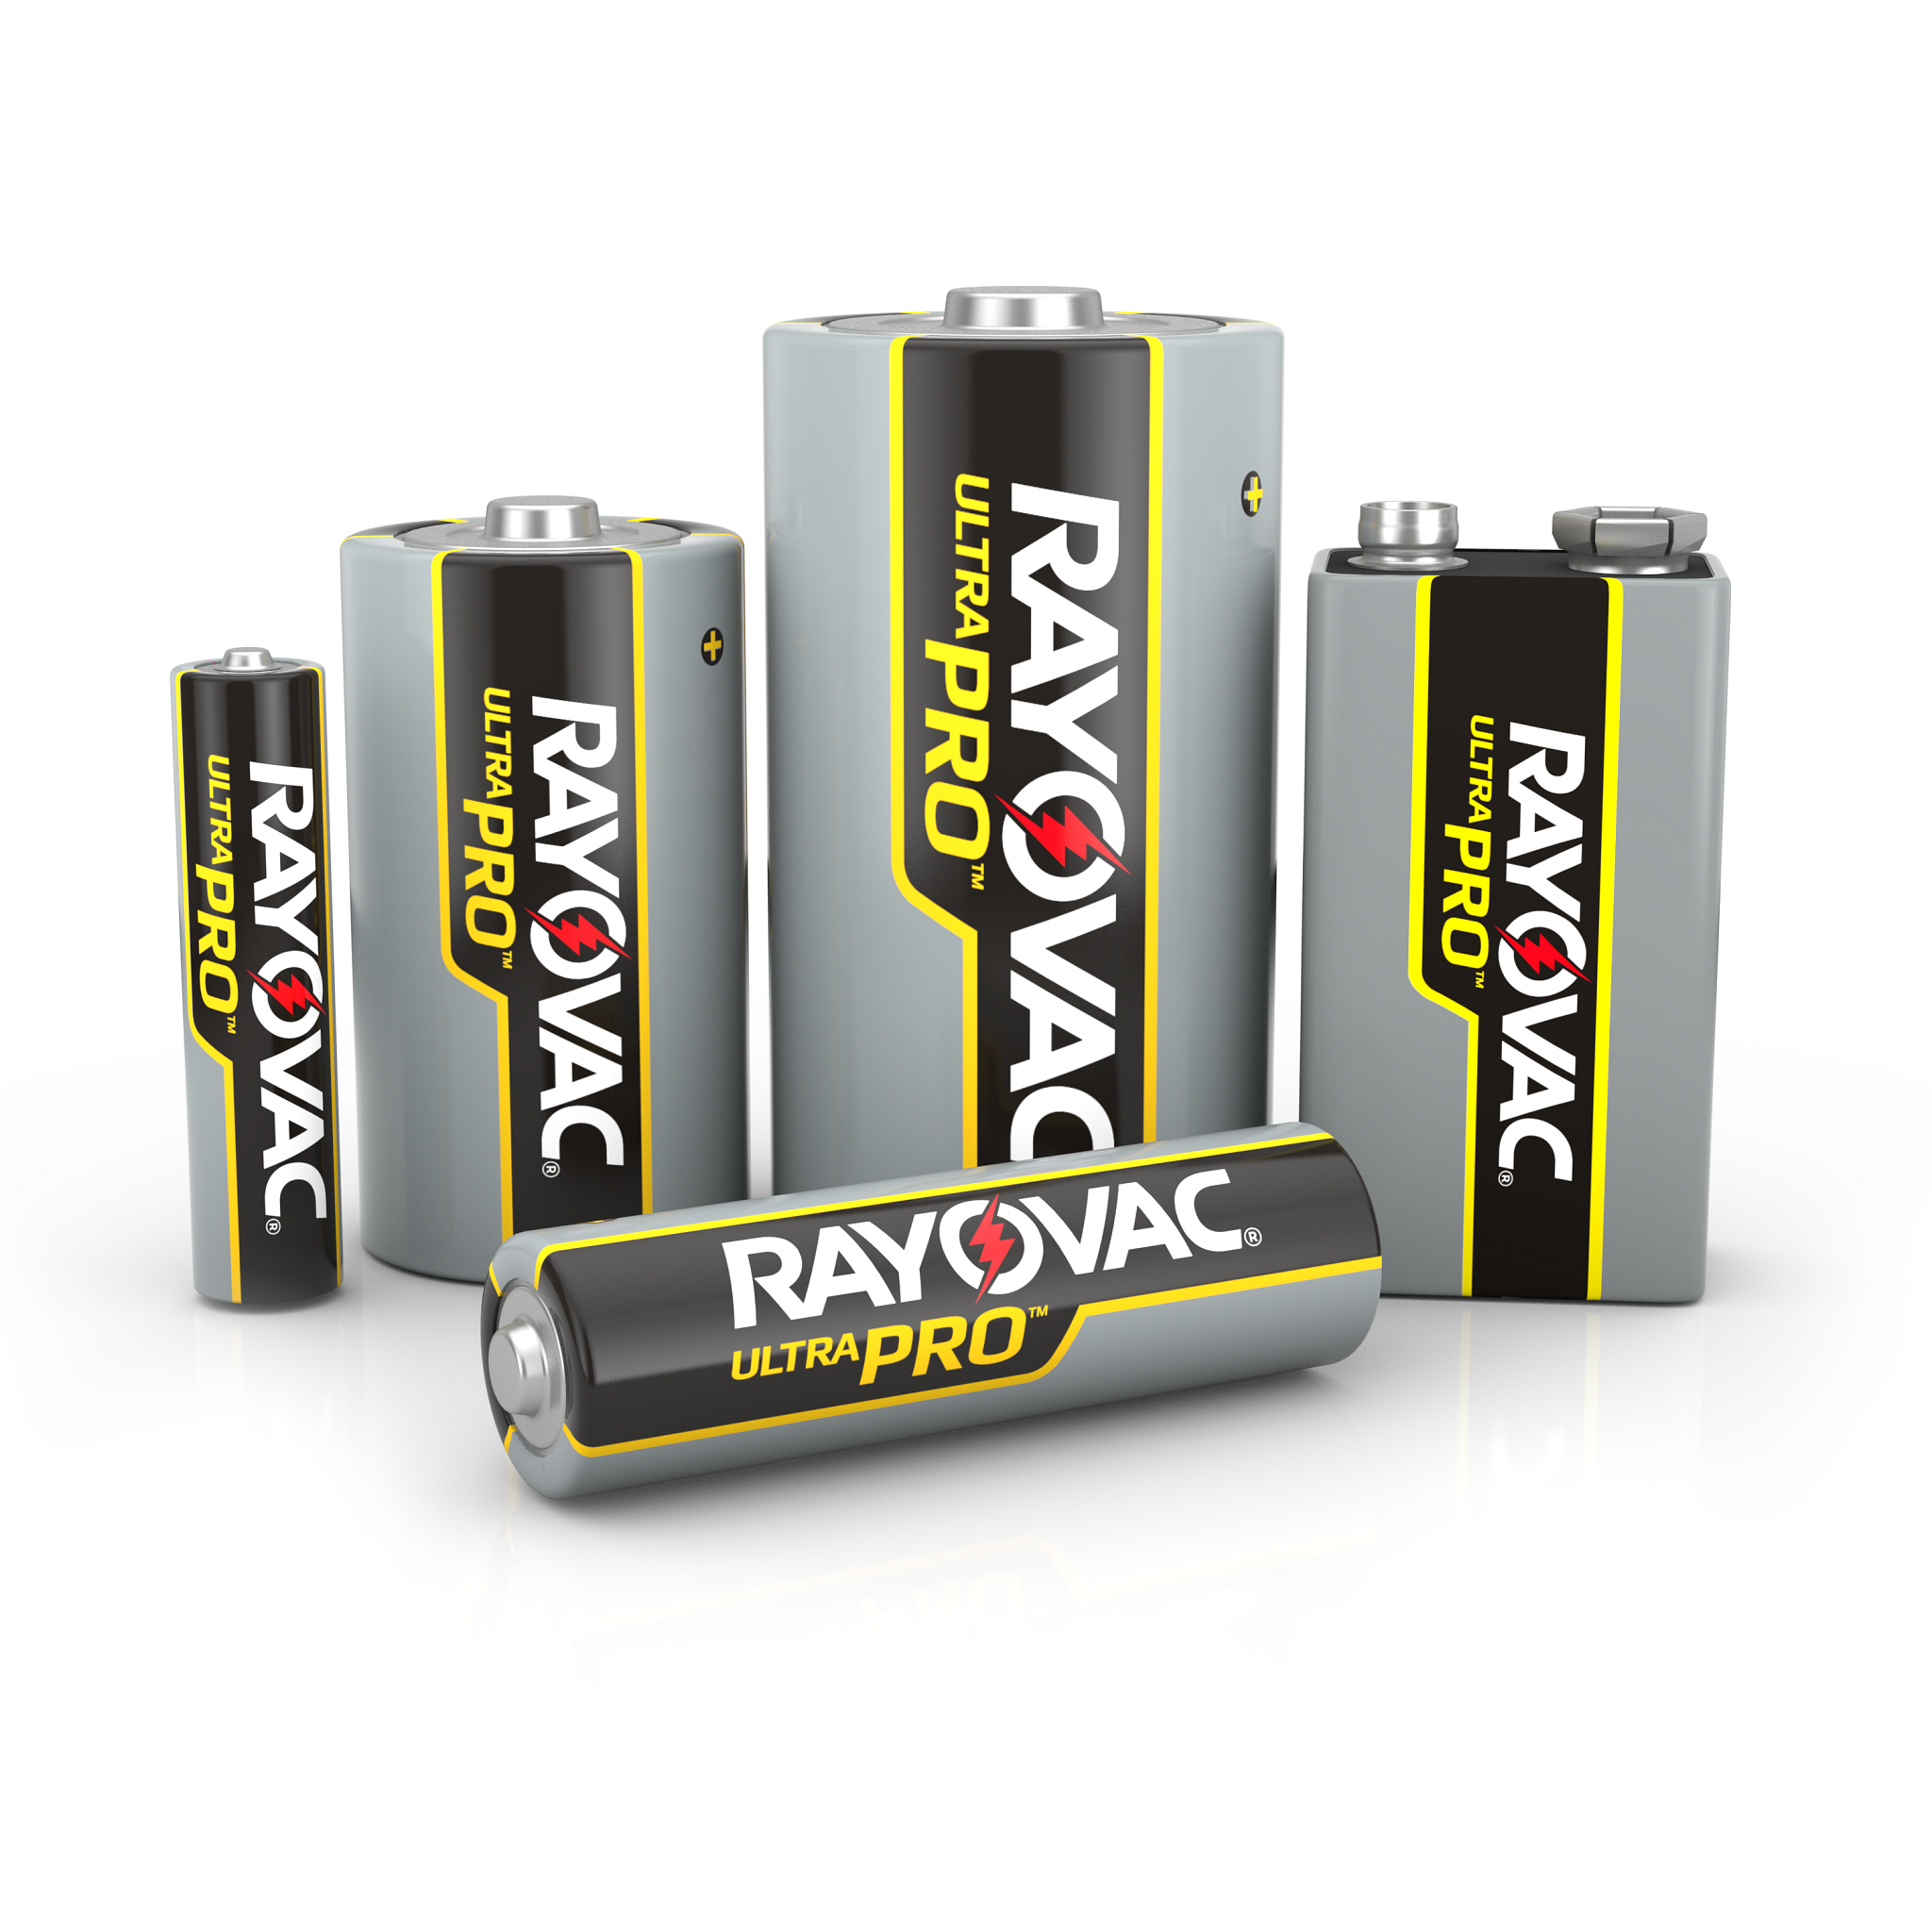 Rayovac IndustRayovac Industrial Ultra Pro batteries familty of products